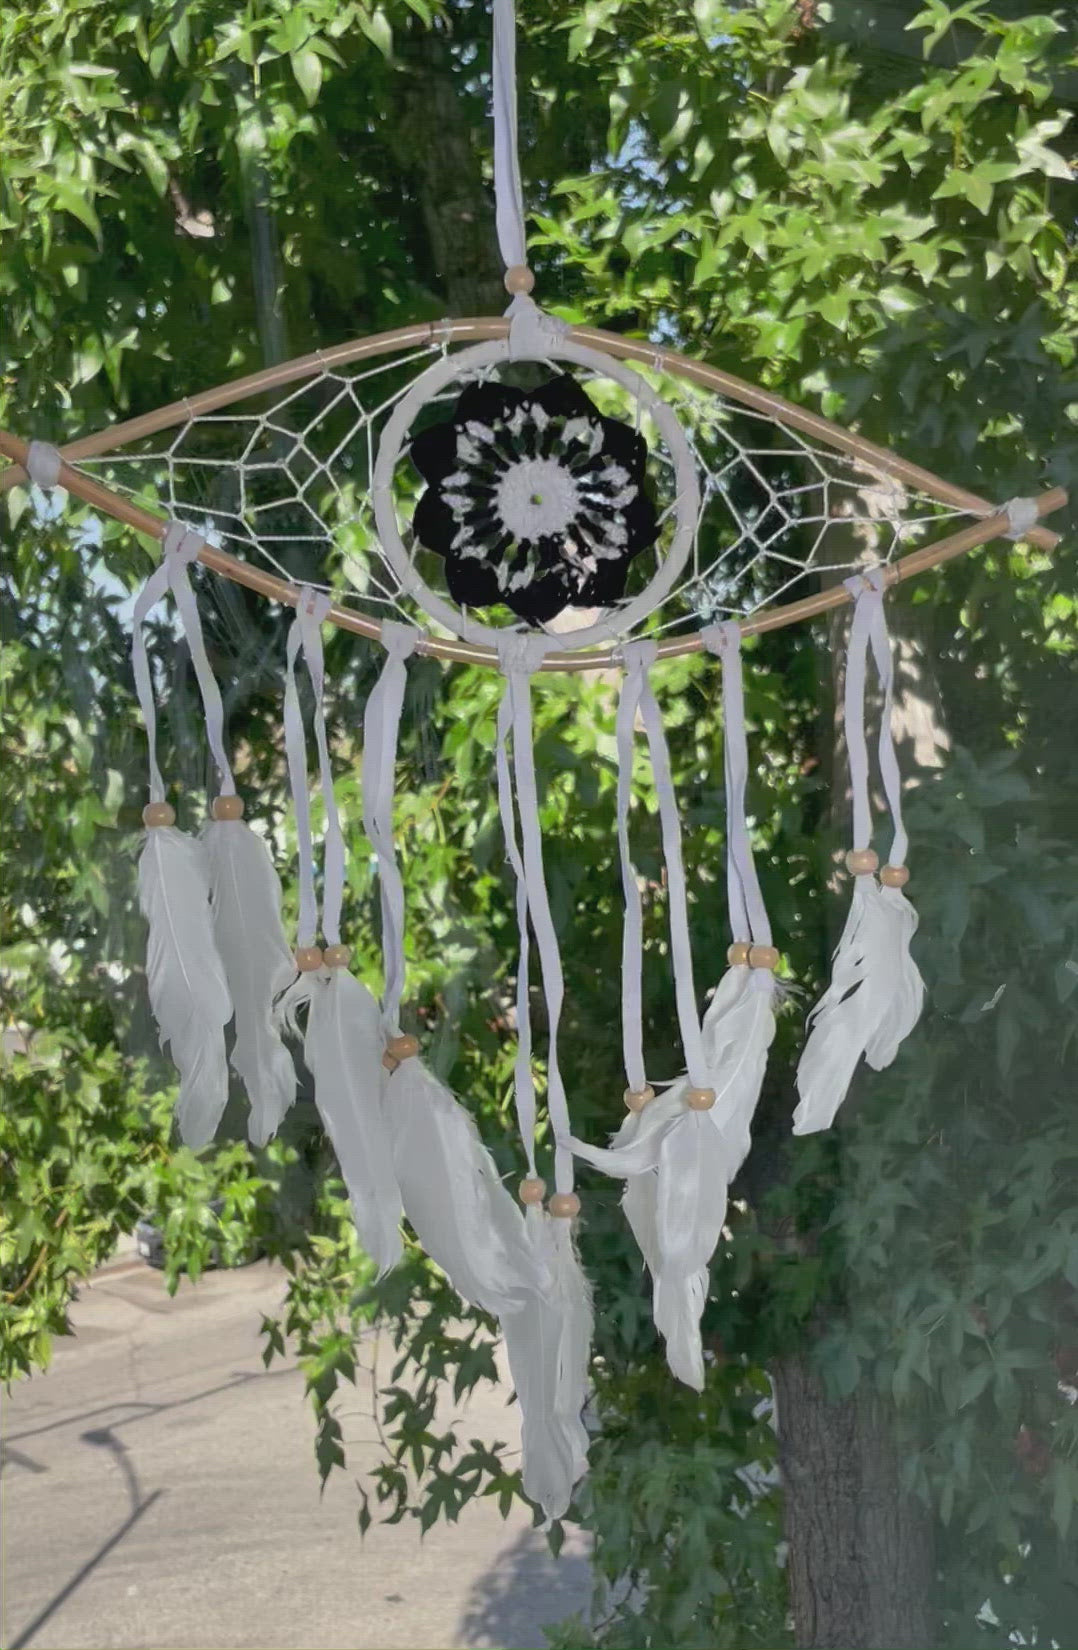 video of black eye dream catcher with a tree in the background as the wind blows through